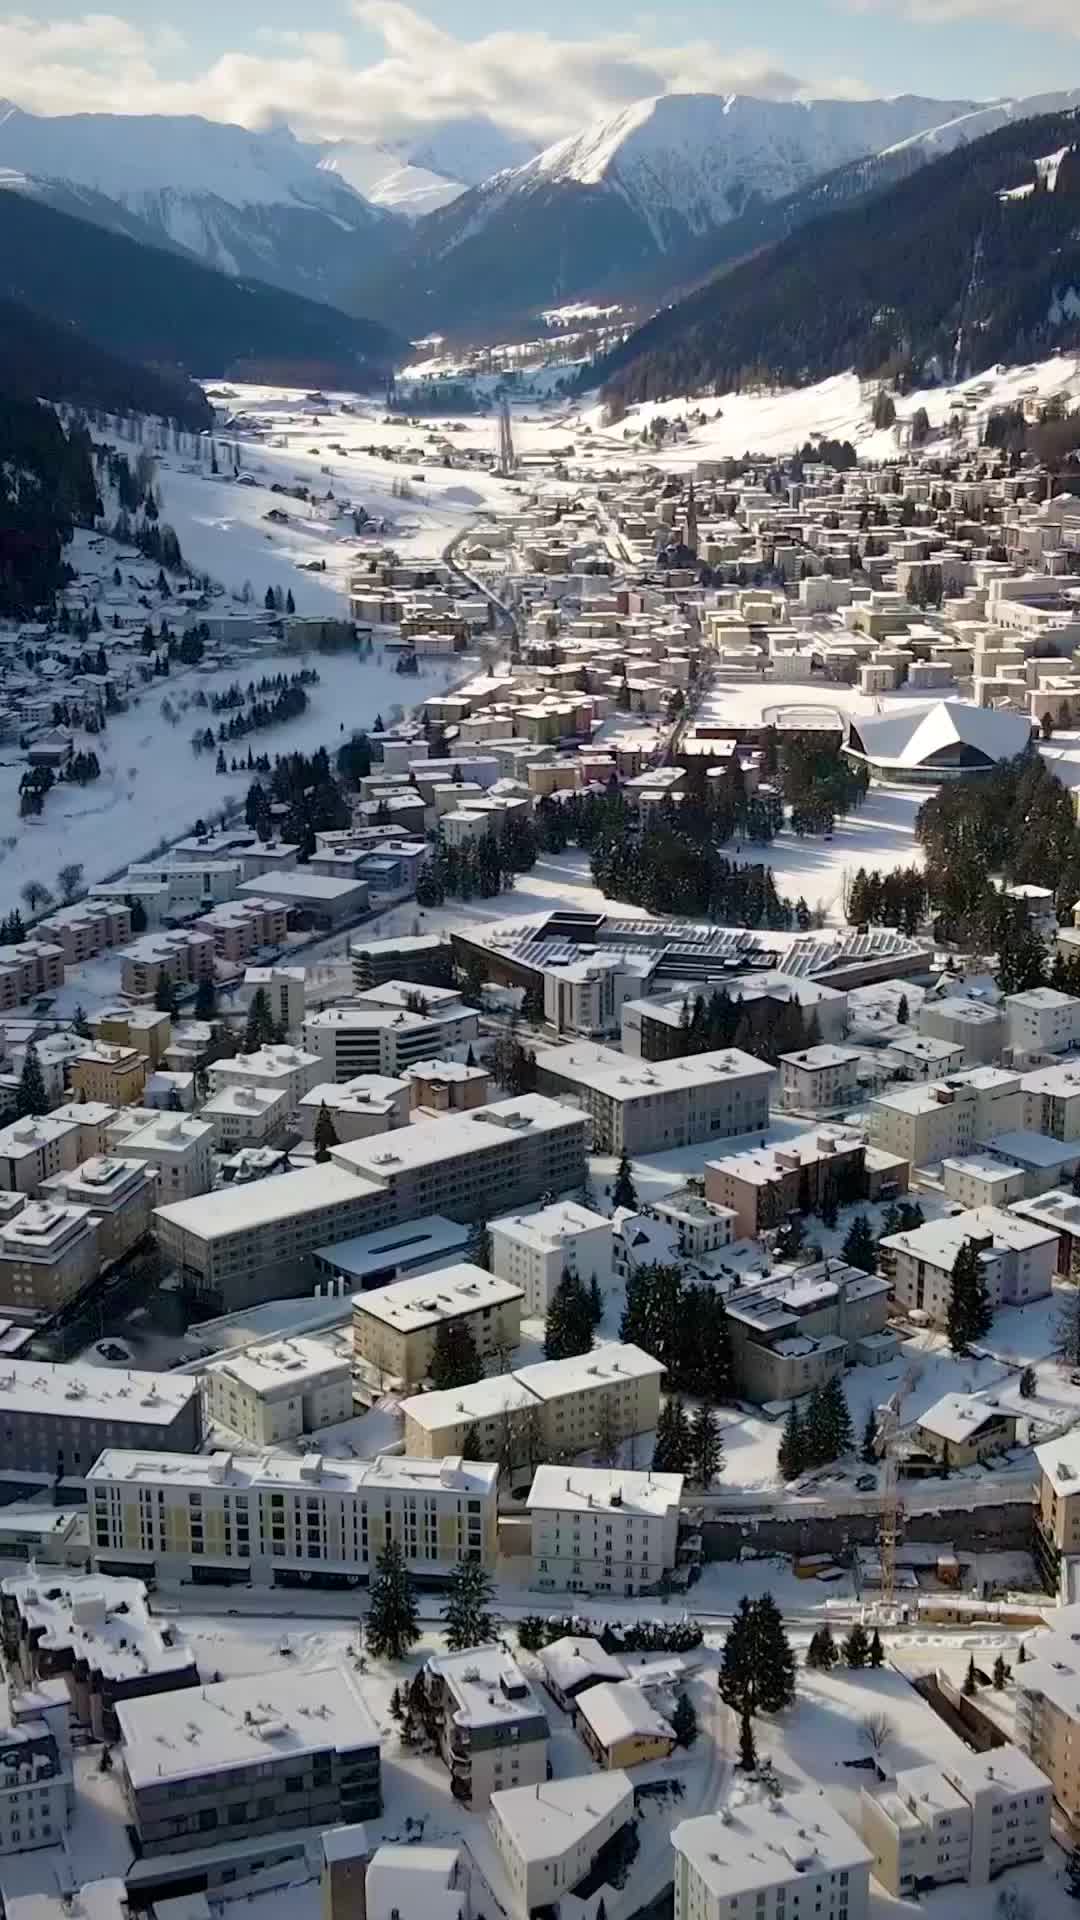 Above Davos: Home of the World Economic Forum